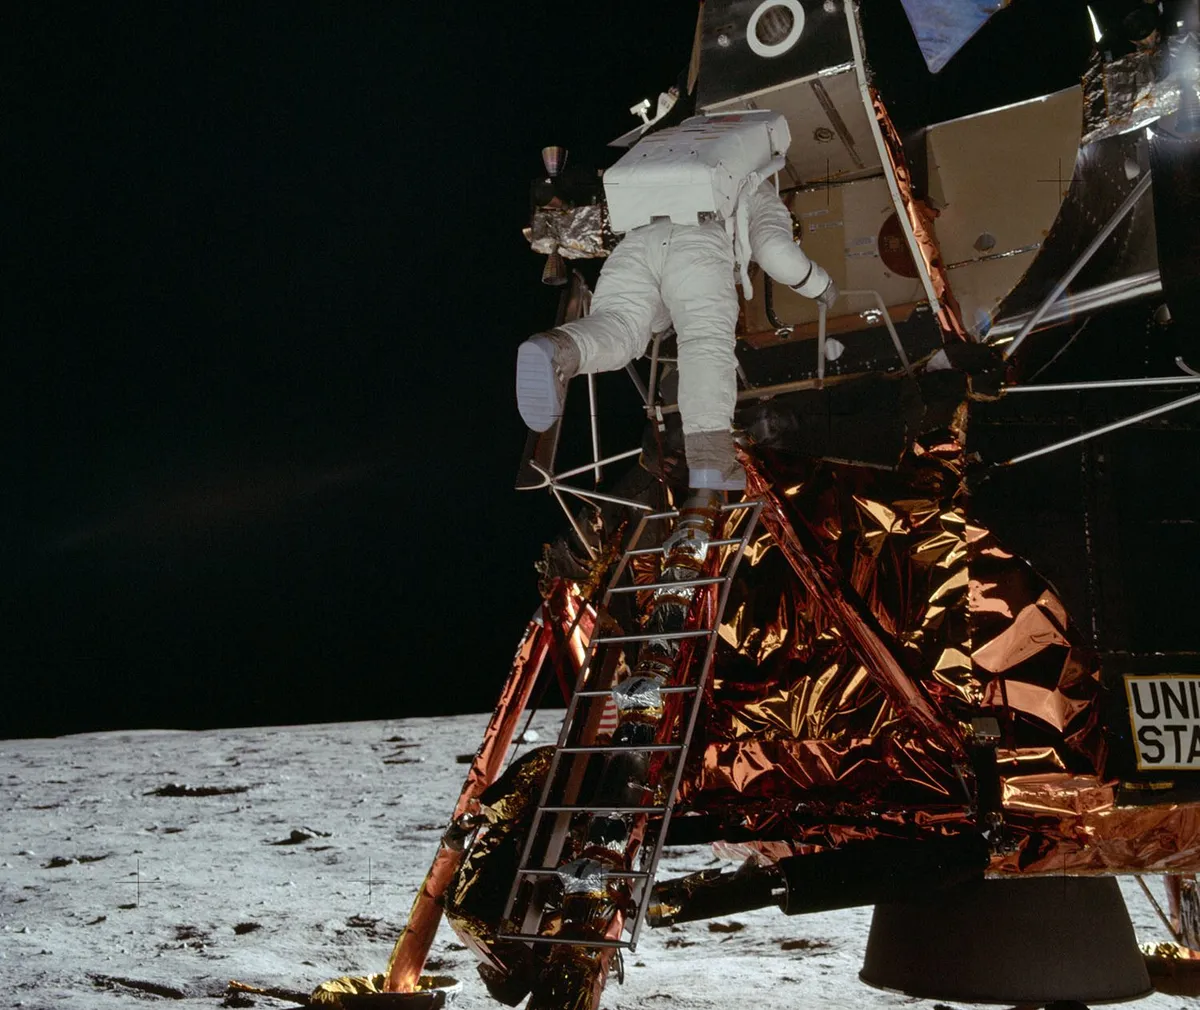 Buzz Aldrin descends the ladder of the Apollo 11 Lunar Module to become the second man on the Moon. Credit: NASA